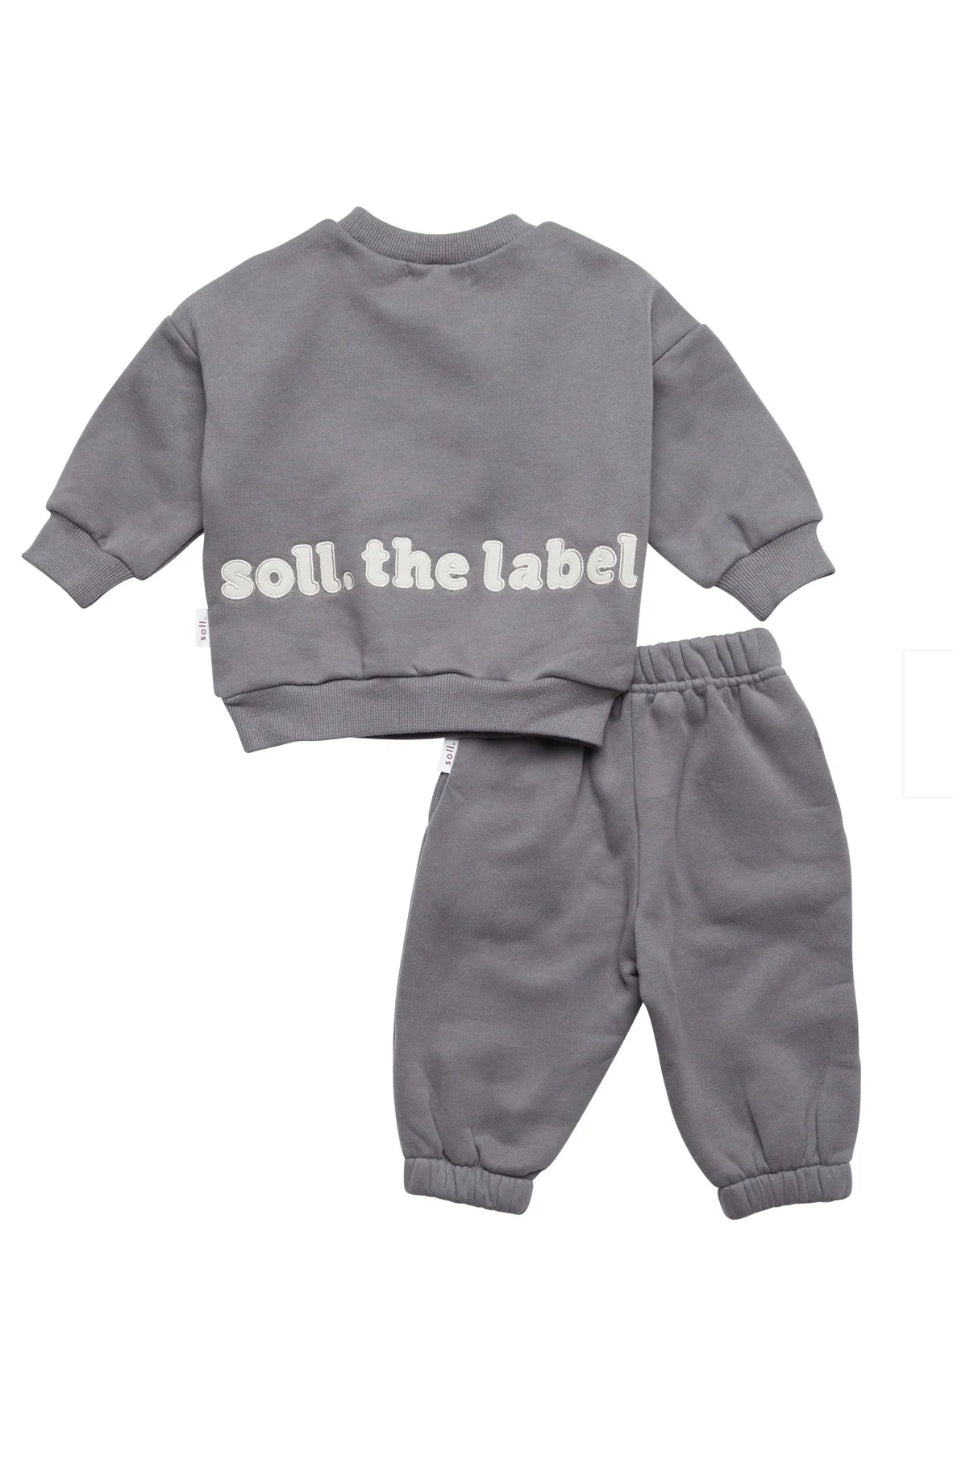 For The Fun Fleece Set - Charcoal Soll The Label – Jelly Tot